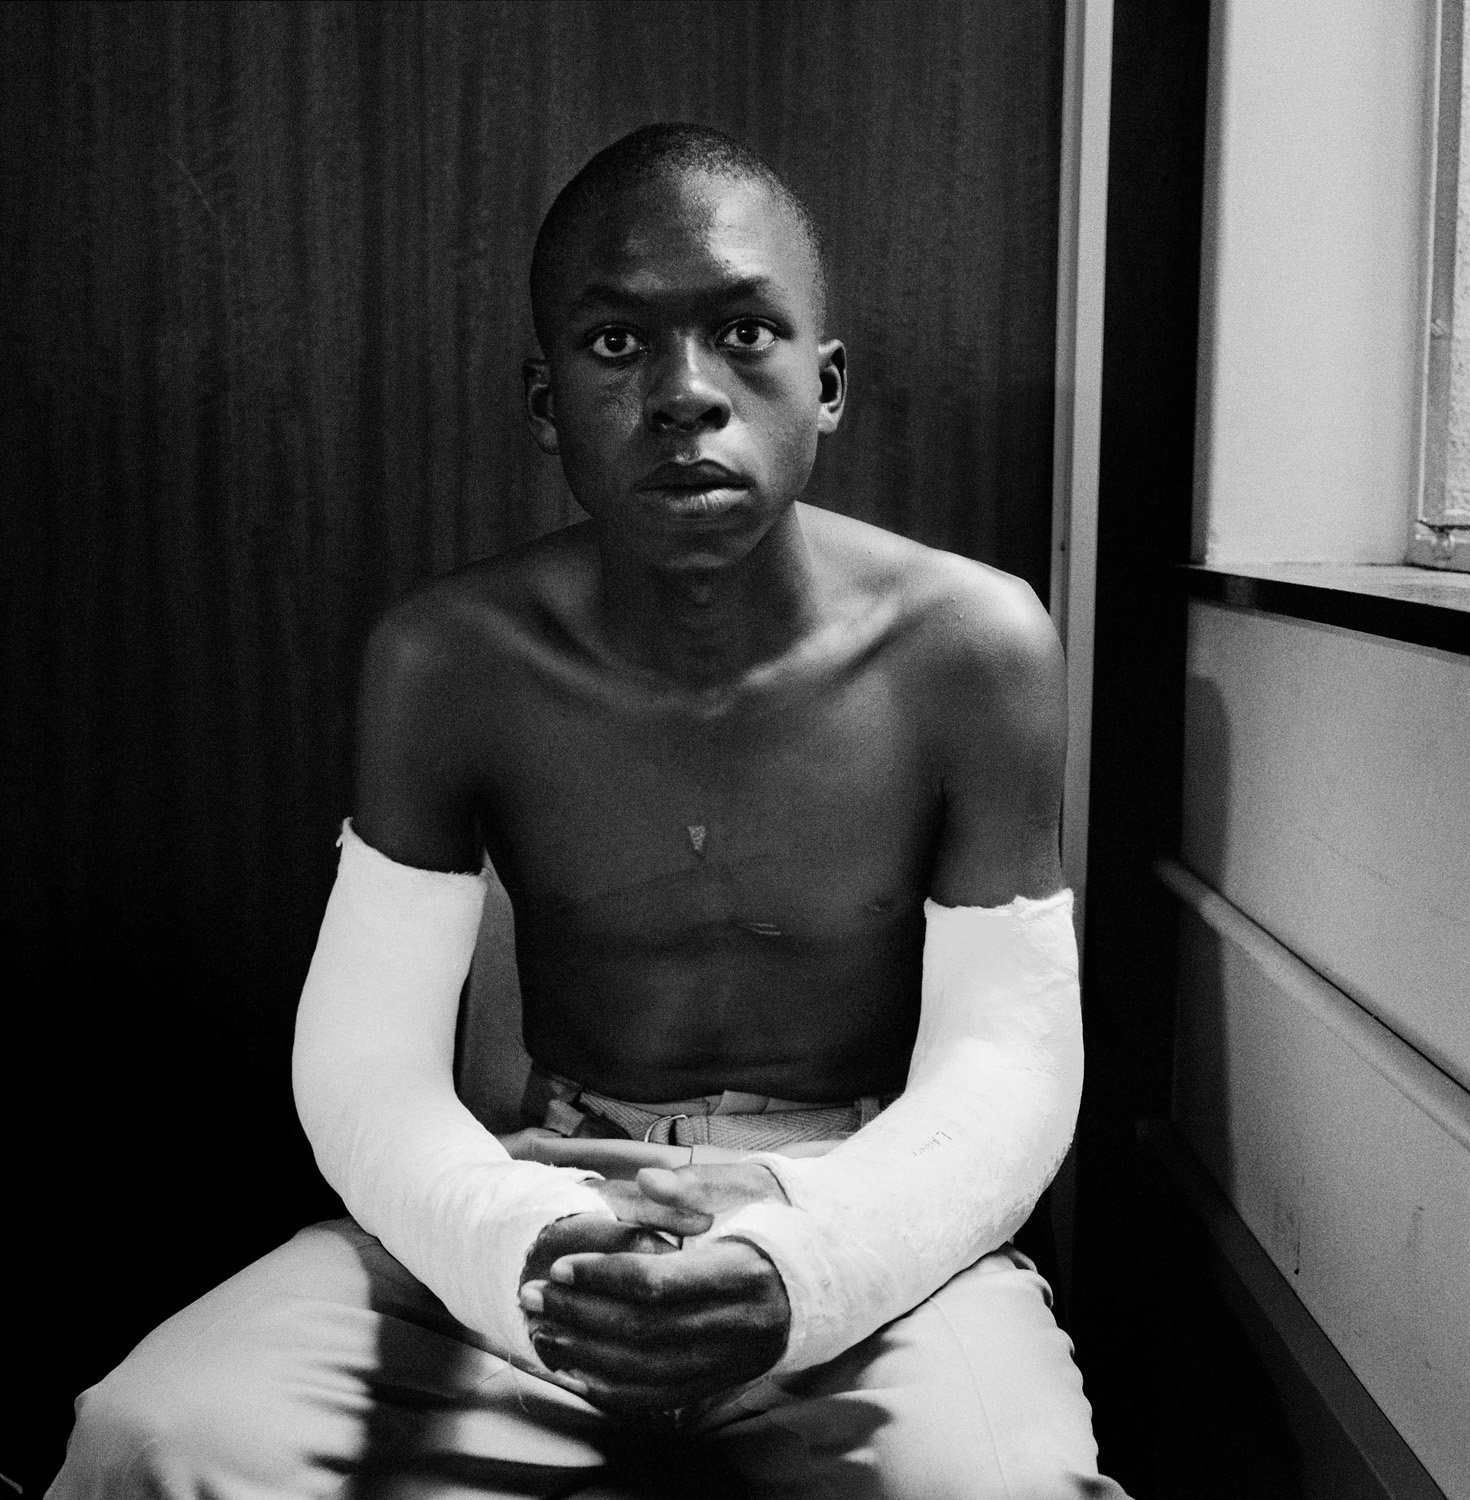 David Goldblatt, Fifteen-year old Lawrence Matjee after his assault and detention by the Security Police, Khotso House, de Villiers Street 1985, silver gelatin photograph on fibre-based paper. Image courtesy Goodman Gallery, Johannesburg and Cape Town © The David Goldblatt Legacy Trust